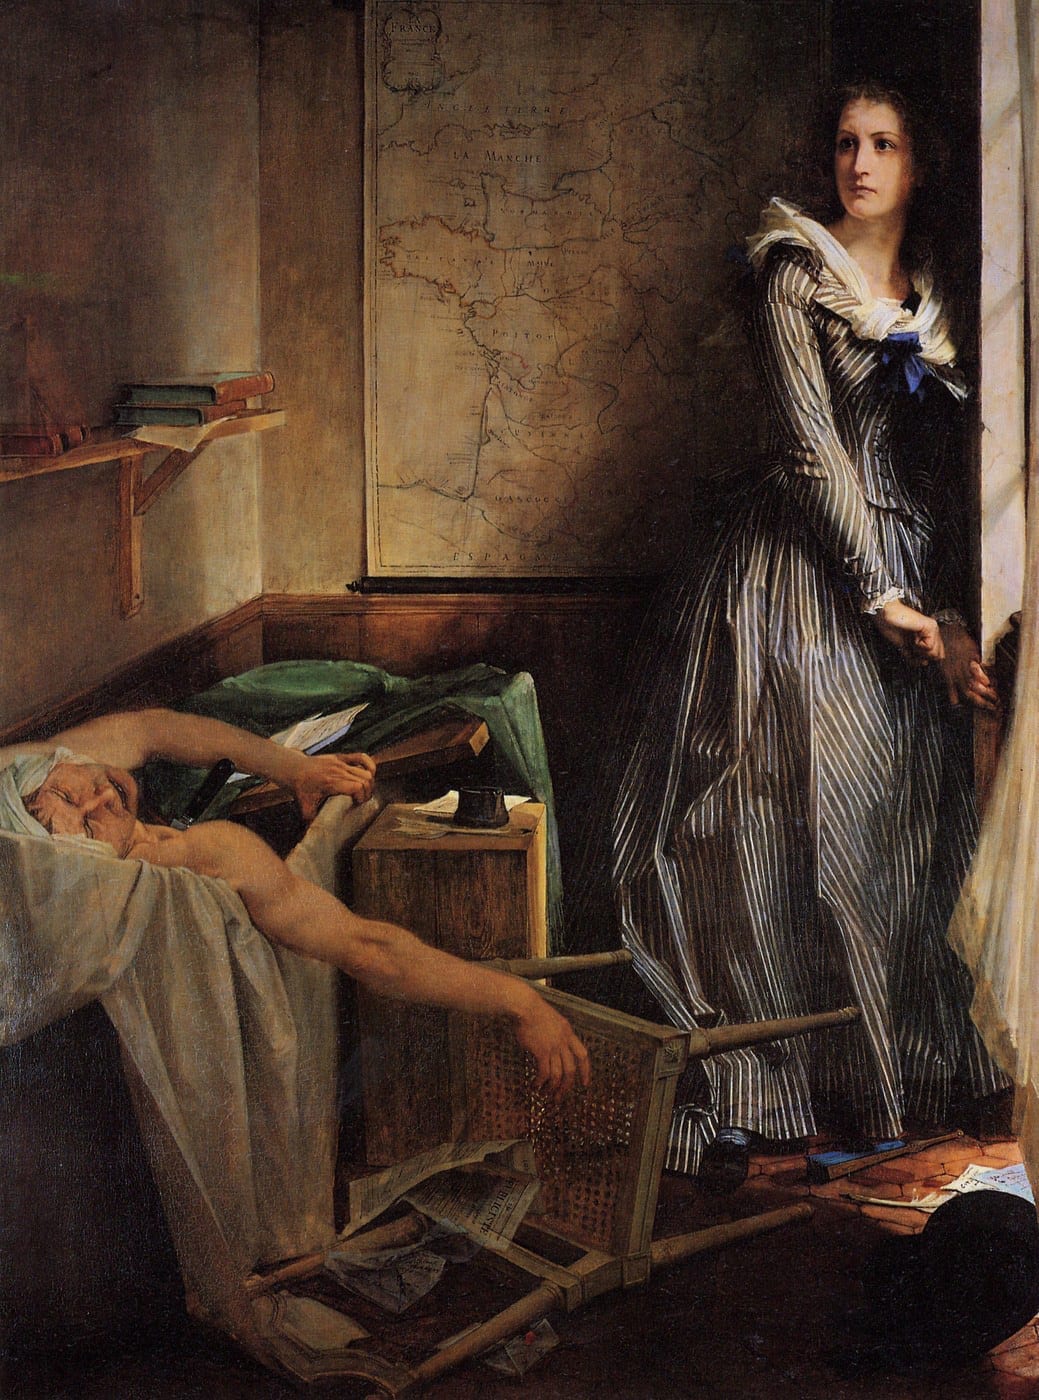 Painting of the assassination of Jean-Paul Marat